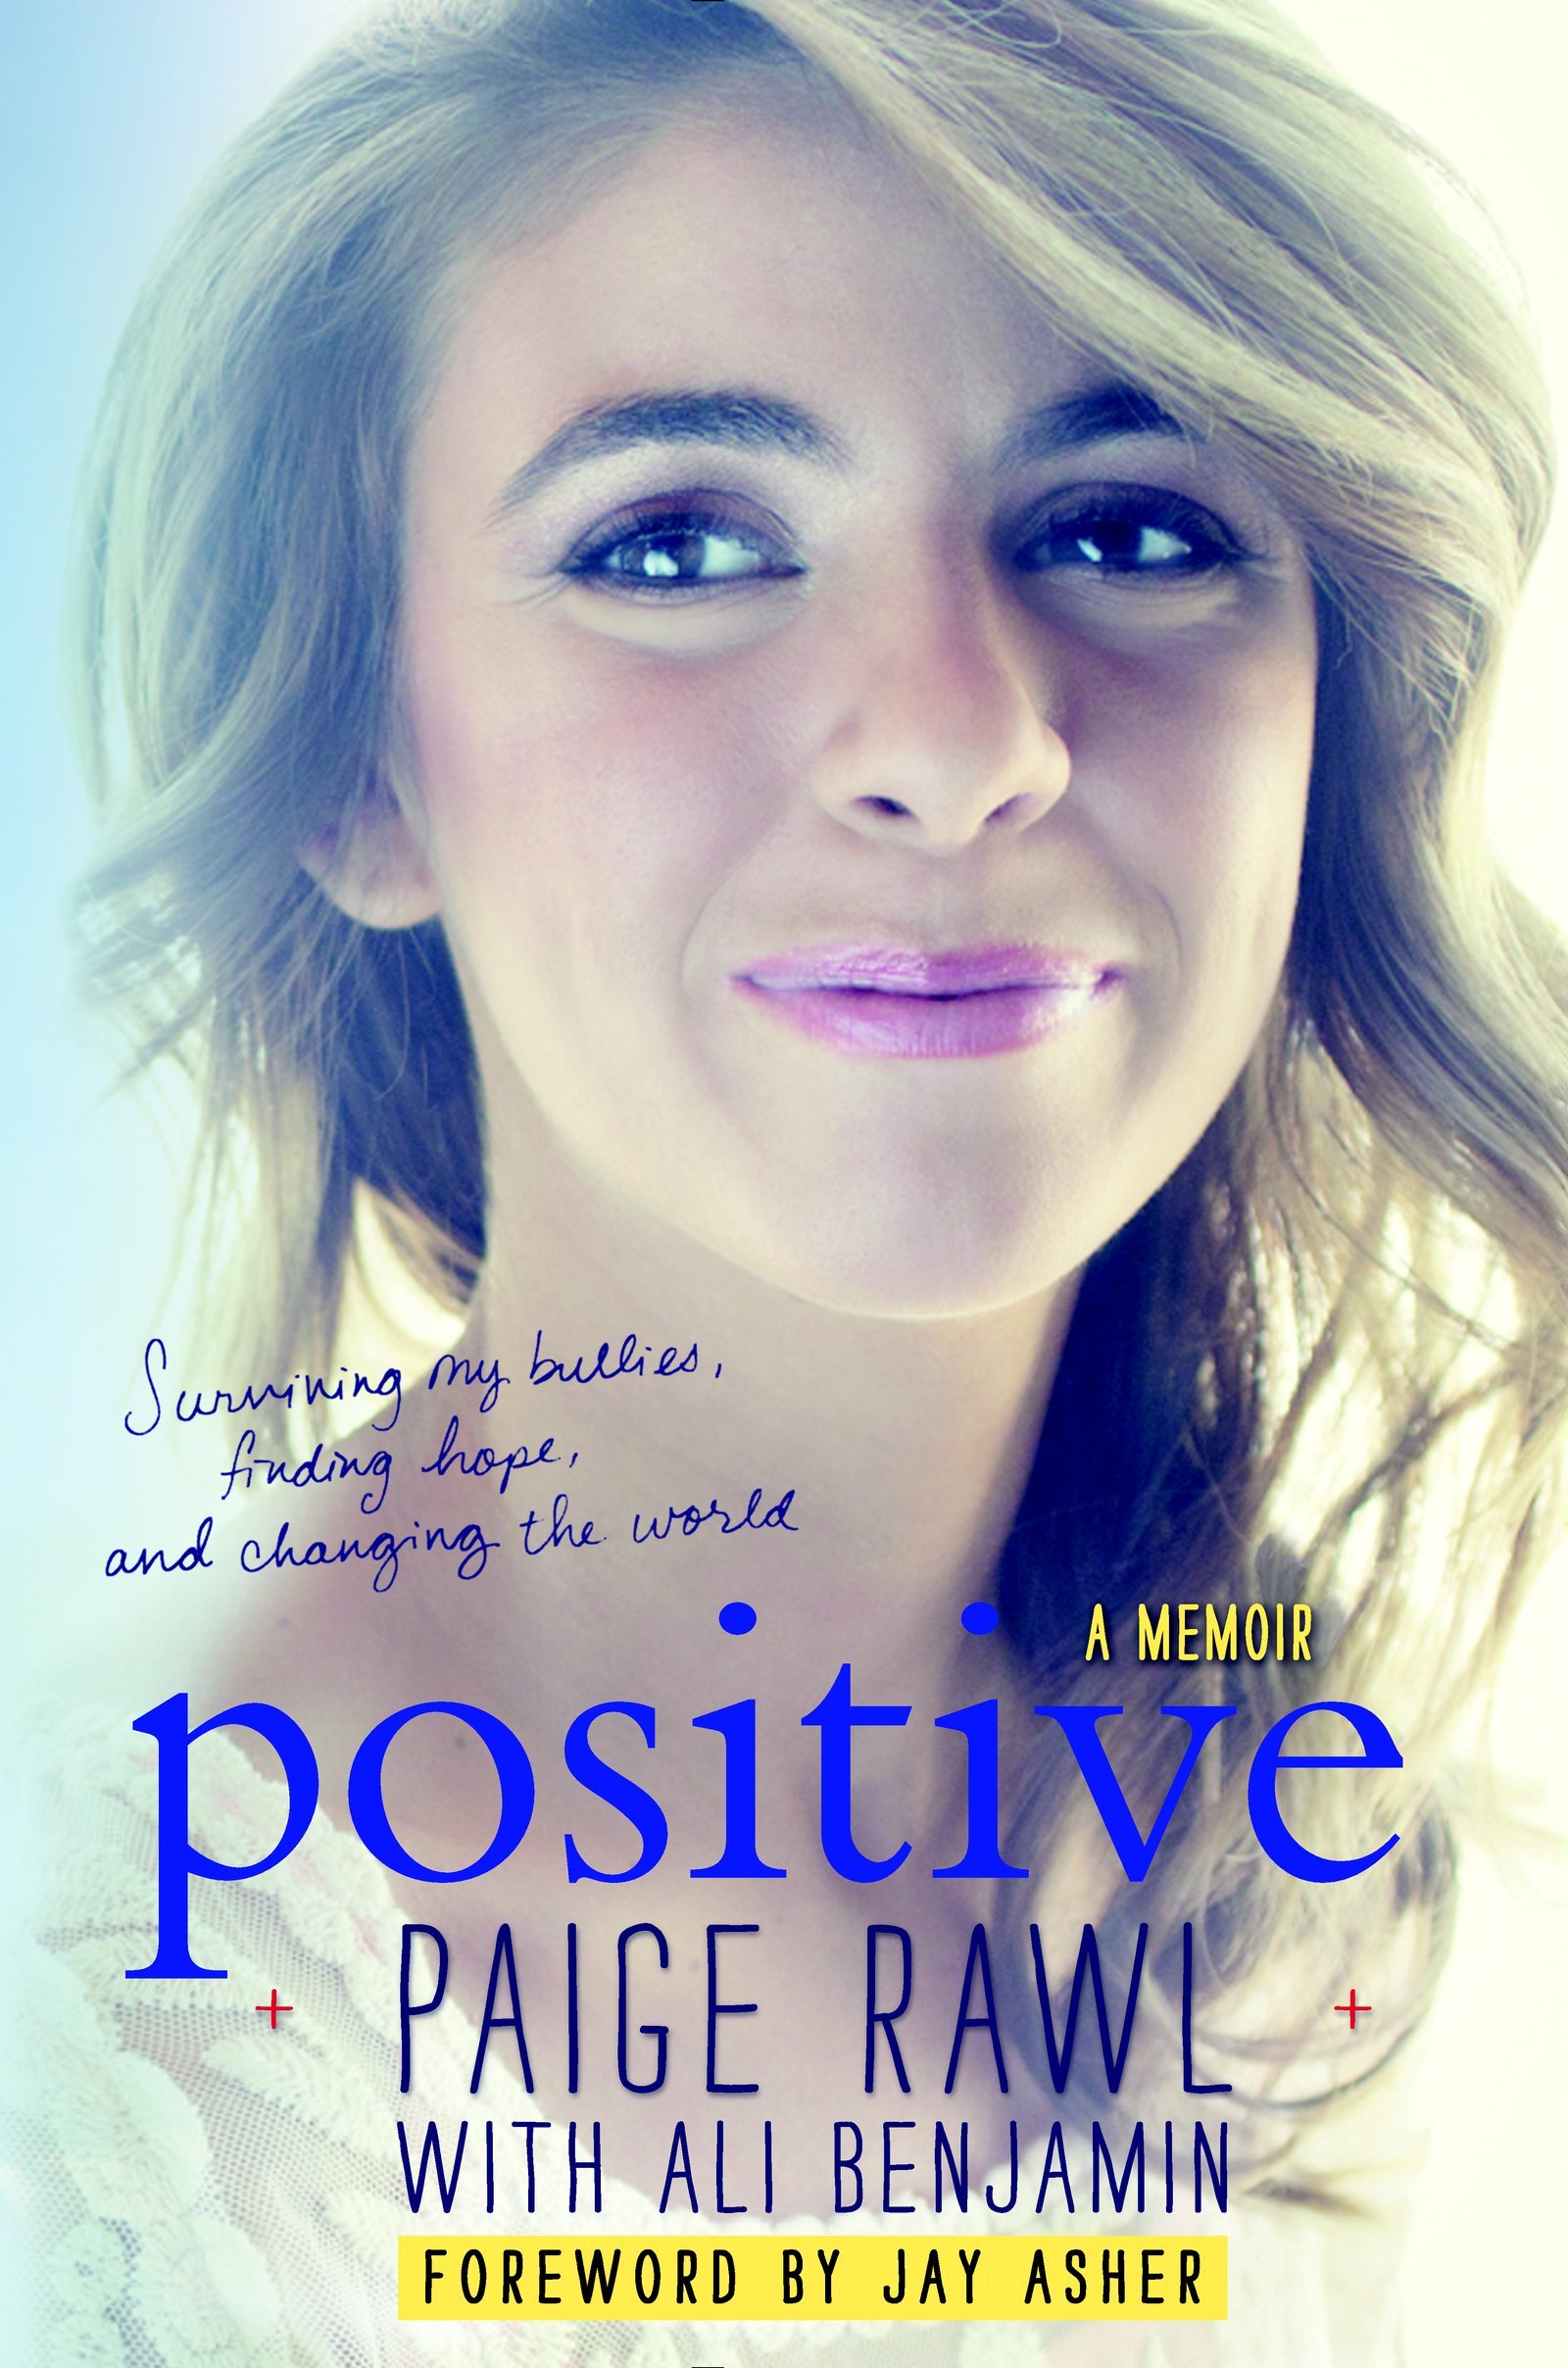 Positive Librarian Preview: Harper Collins (Fall 2014)